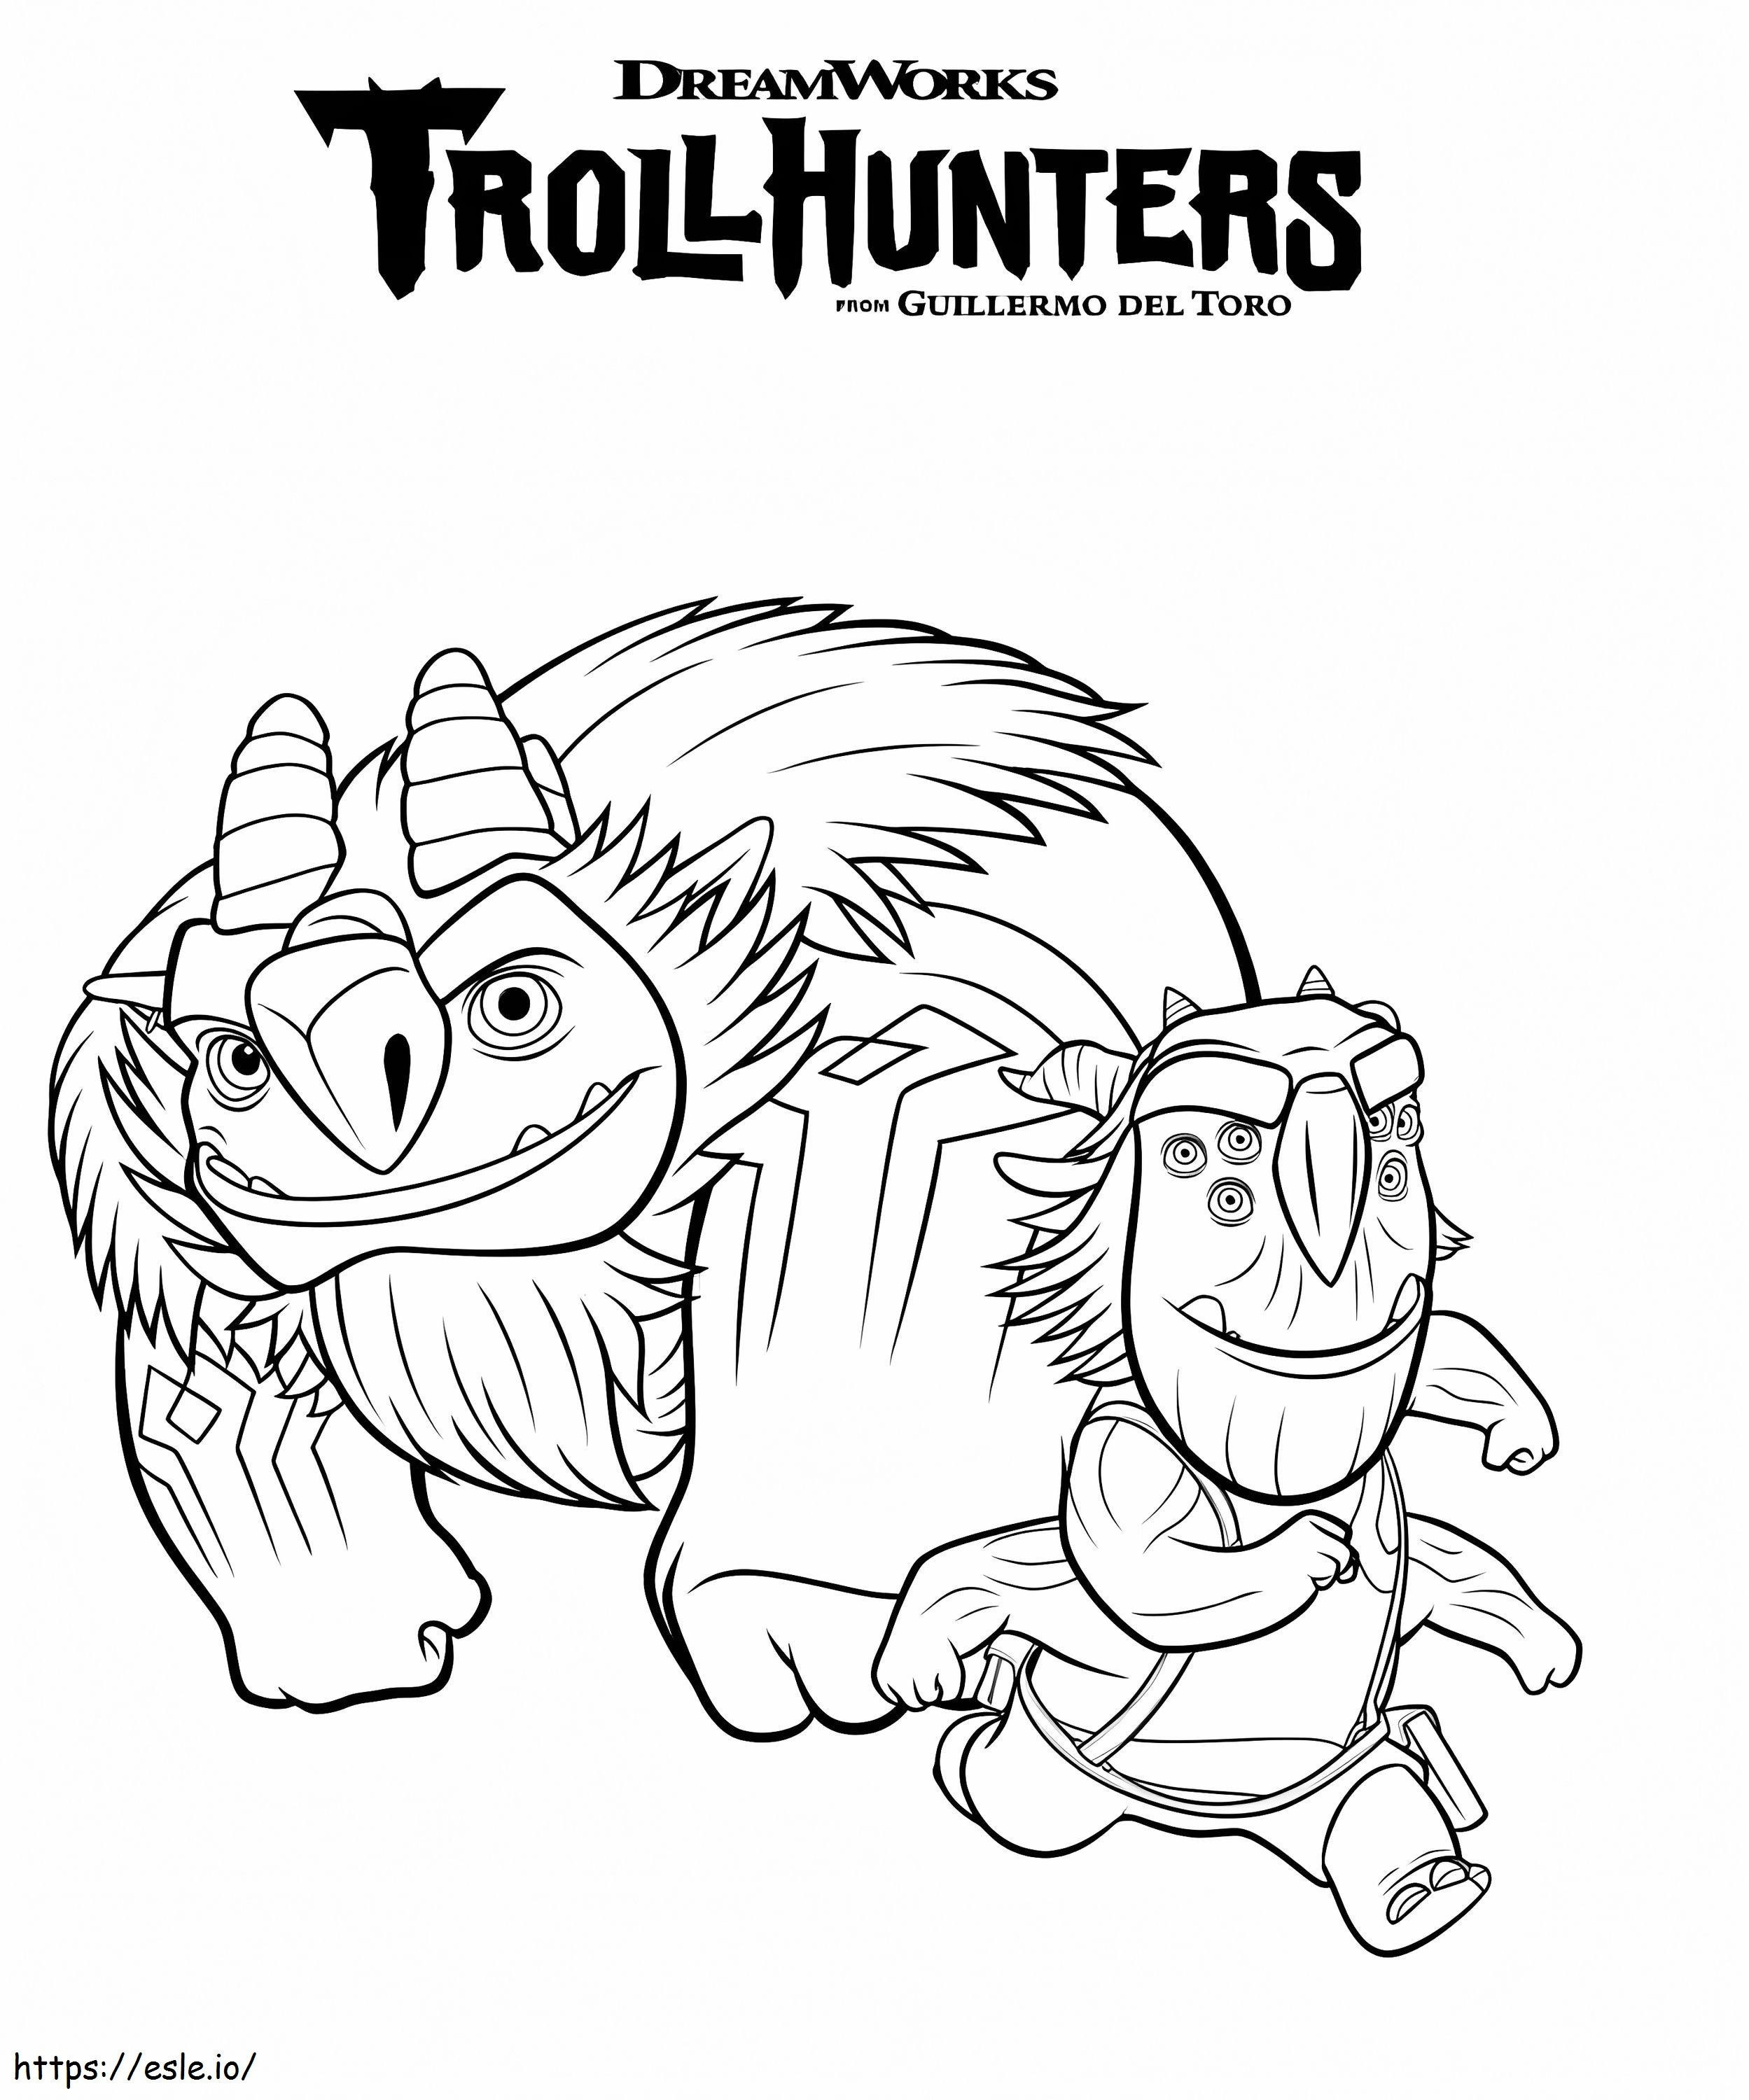 AAARRRGGHH And Blinky From Trollhunters coloring page